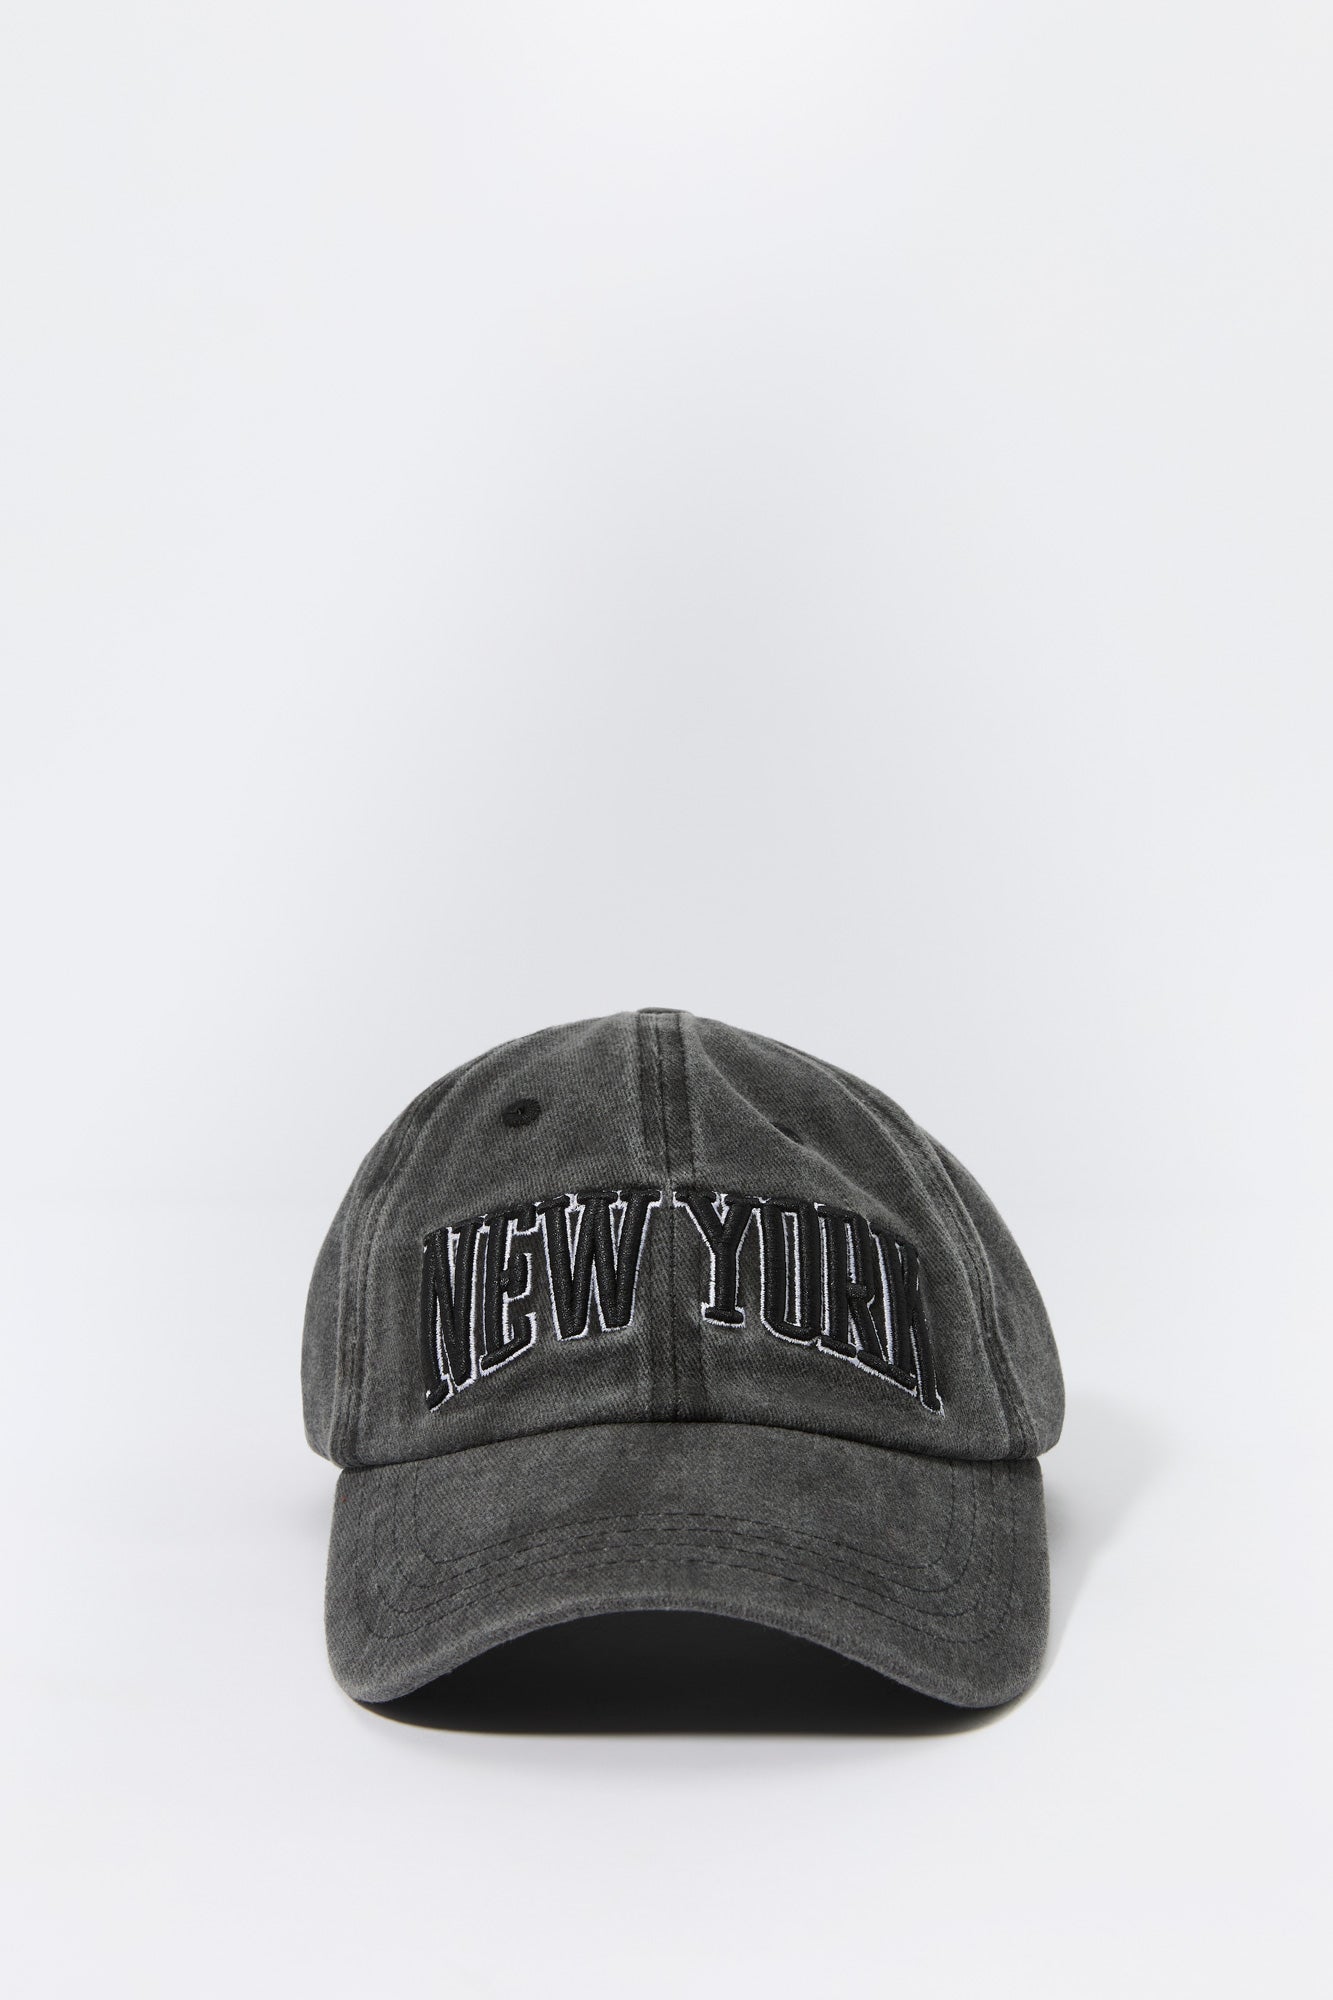 New York Embroidered Washed Baseball Hat